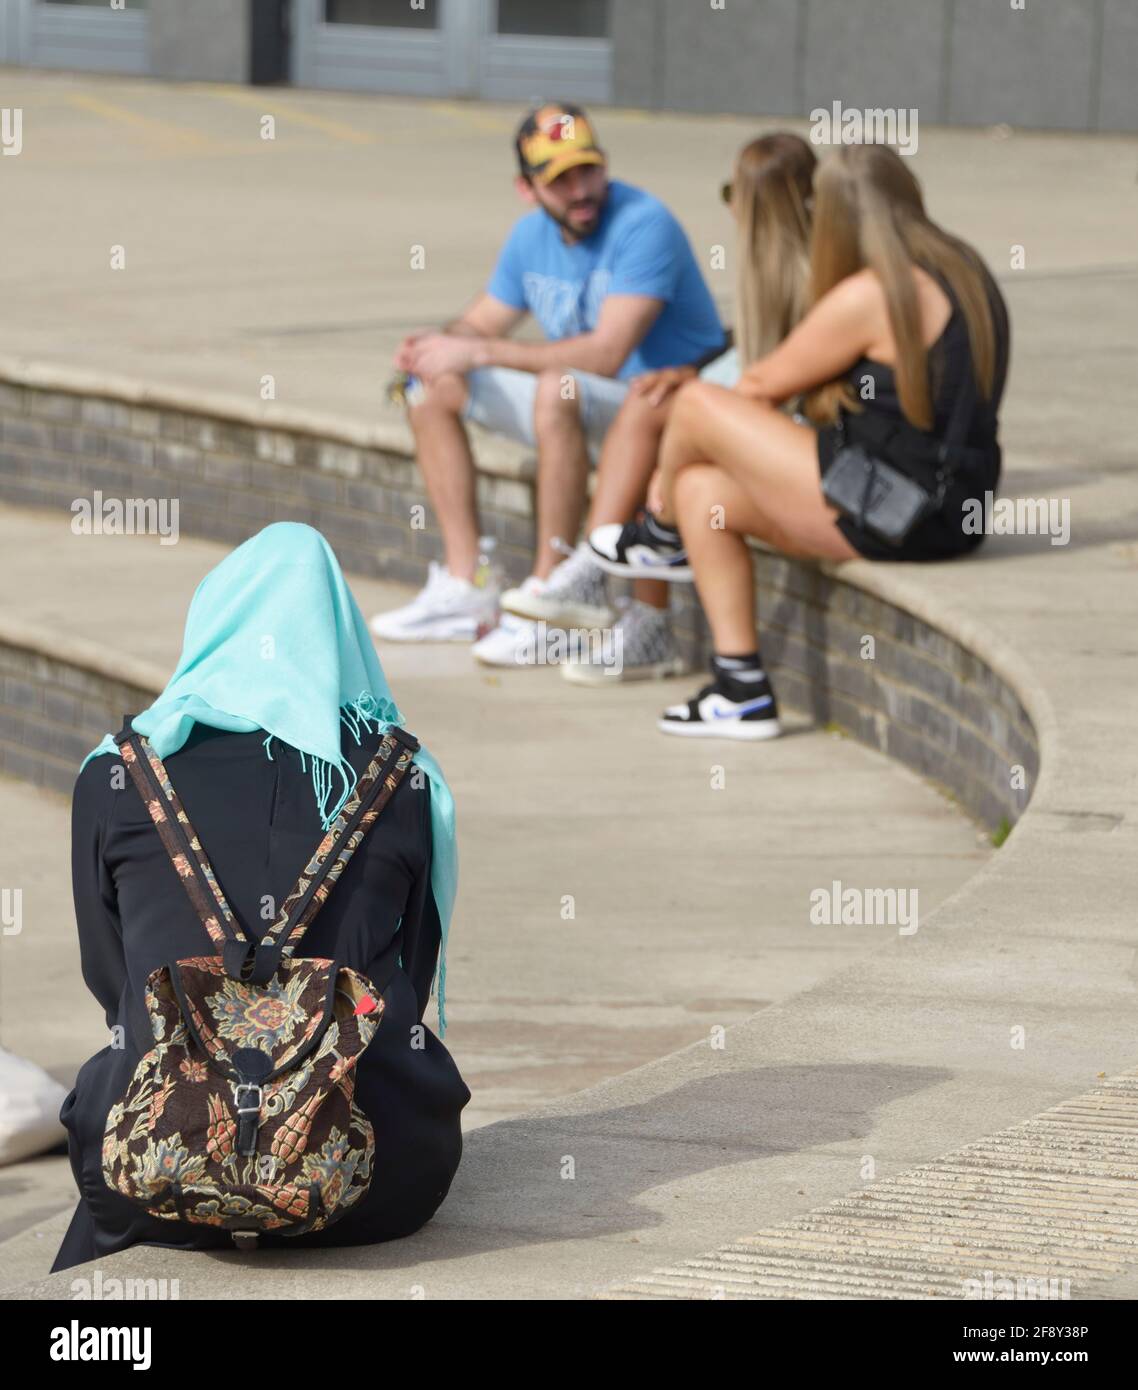 Muslim woman in black with hijab, facing 3 people in shorts & vests Stock Photo